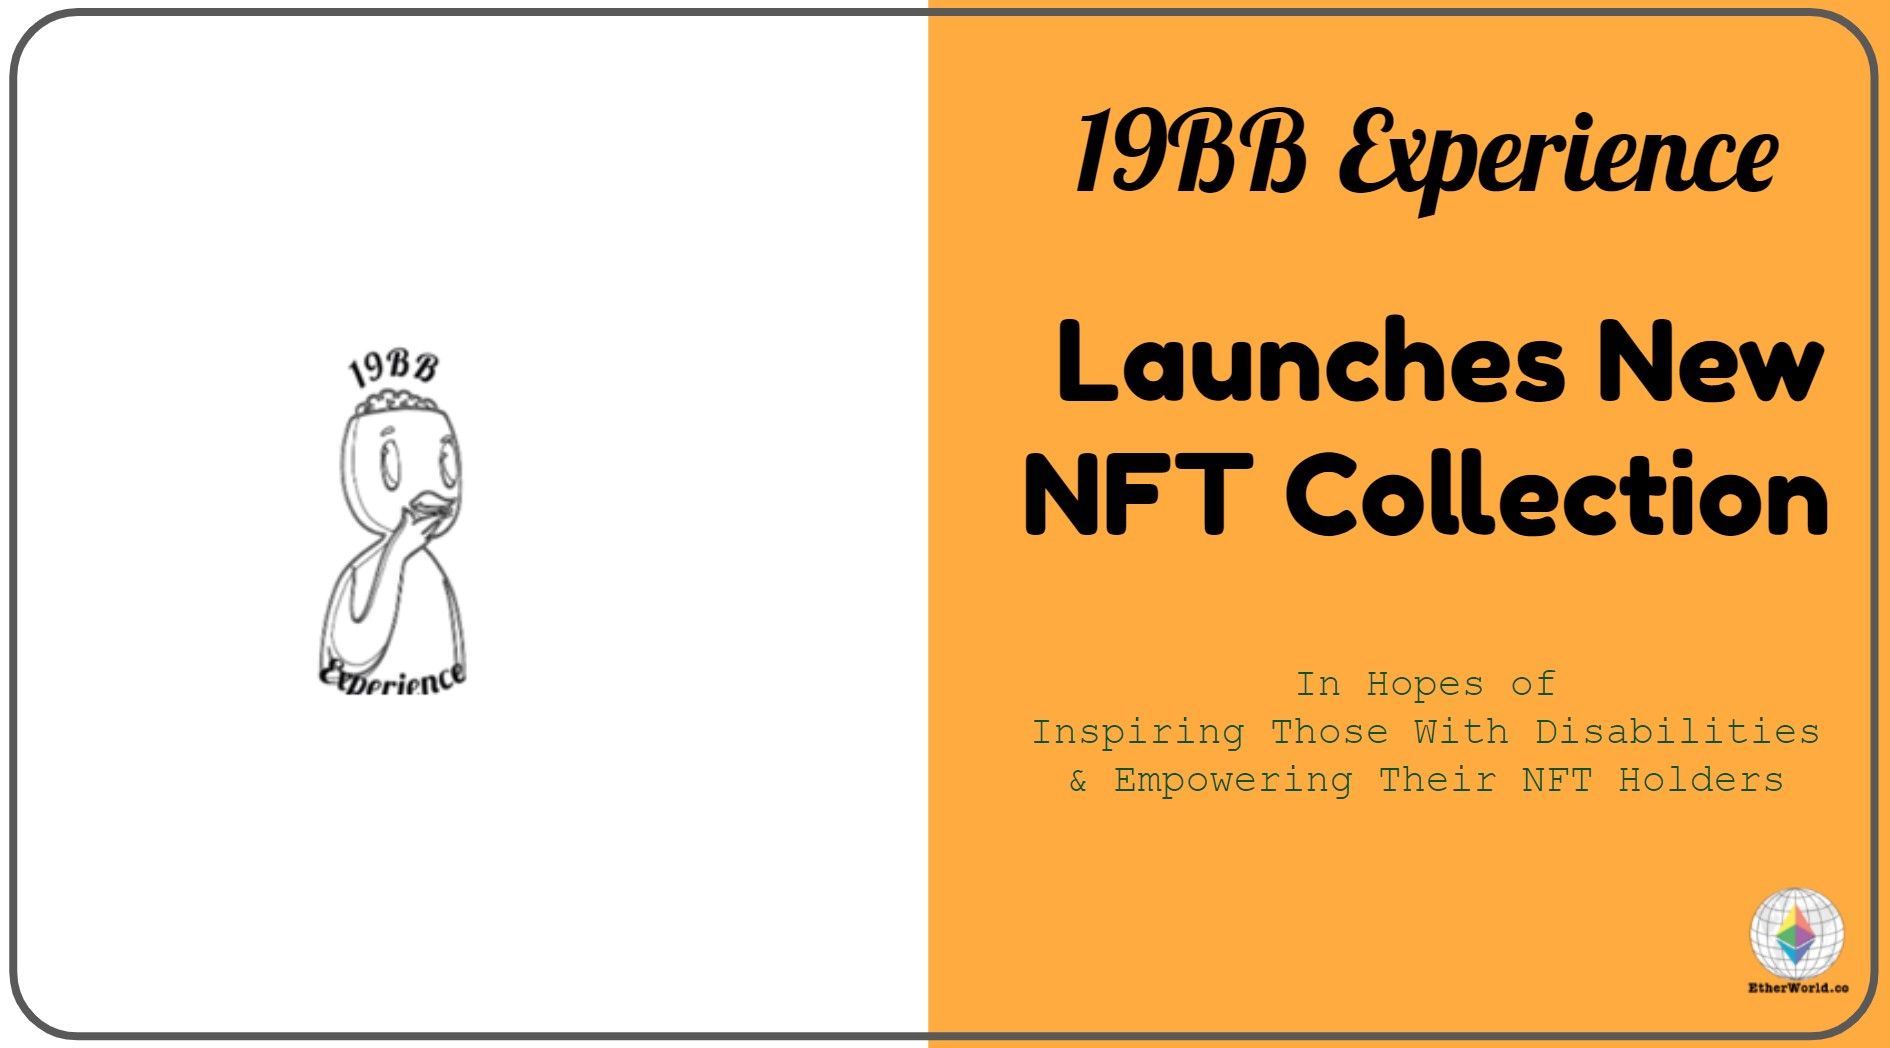 19BB Experience Launches New NFT Collection